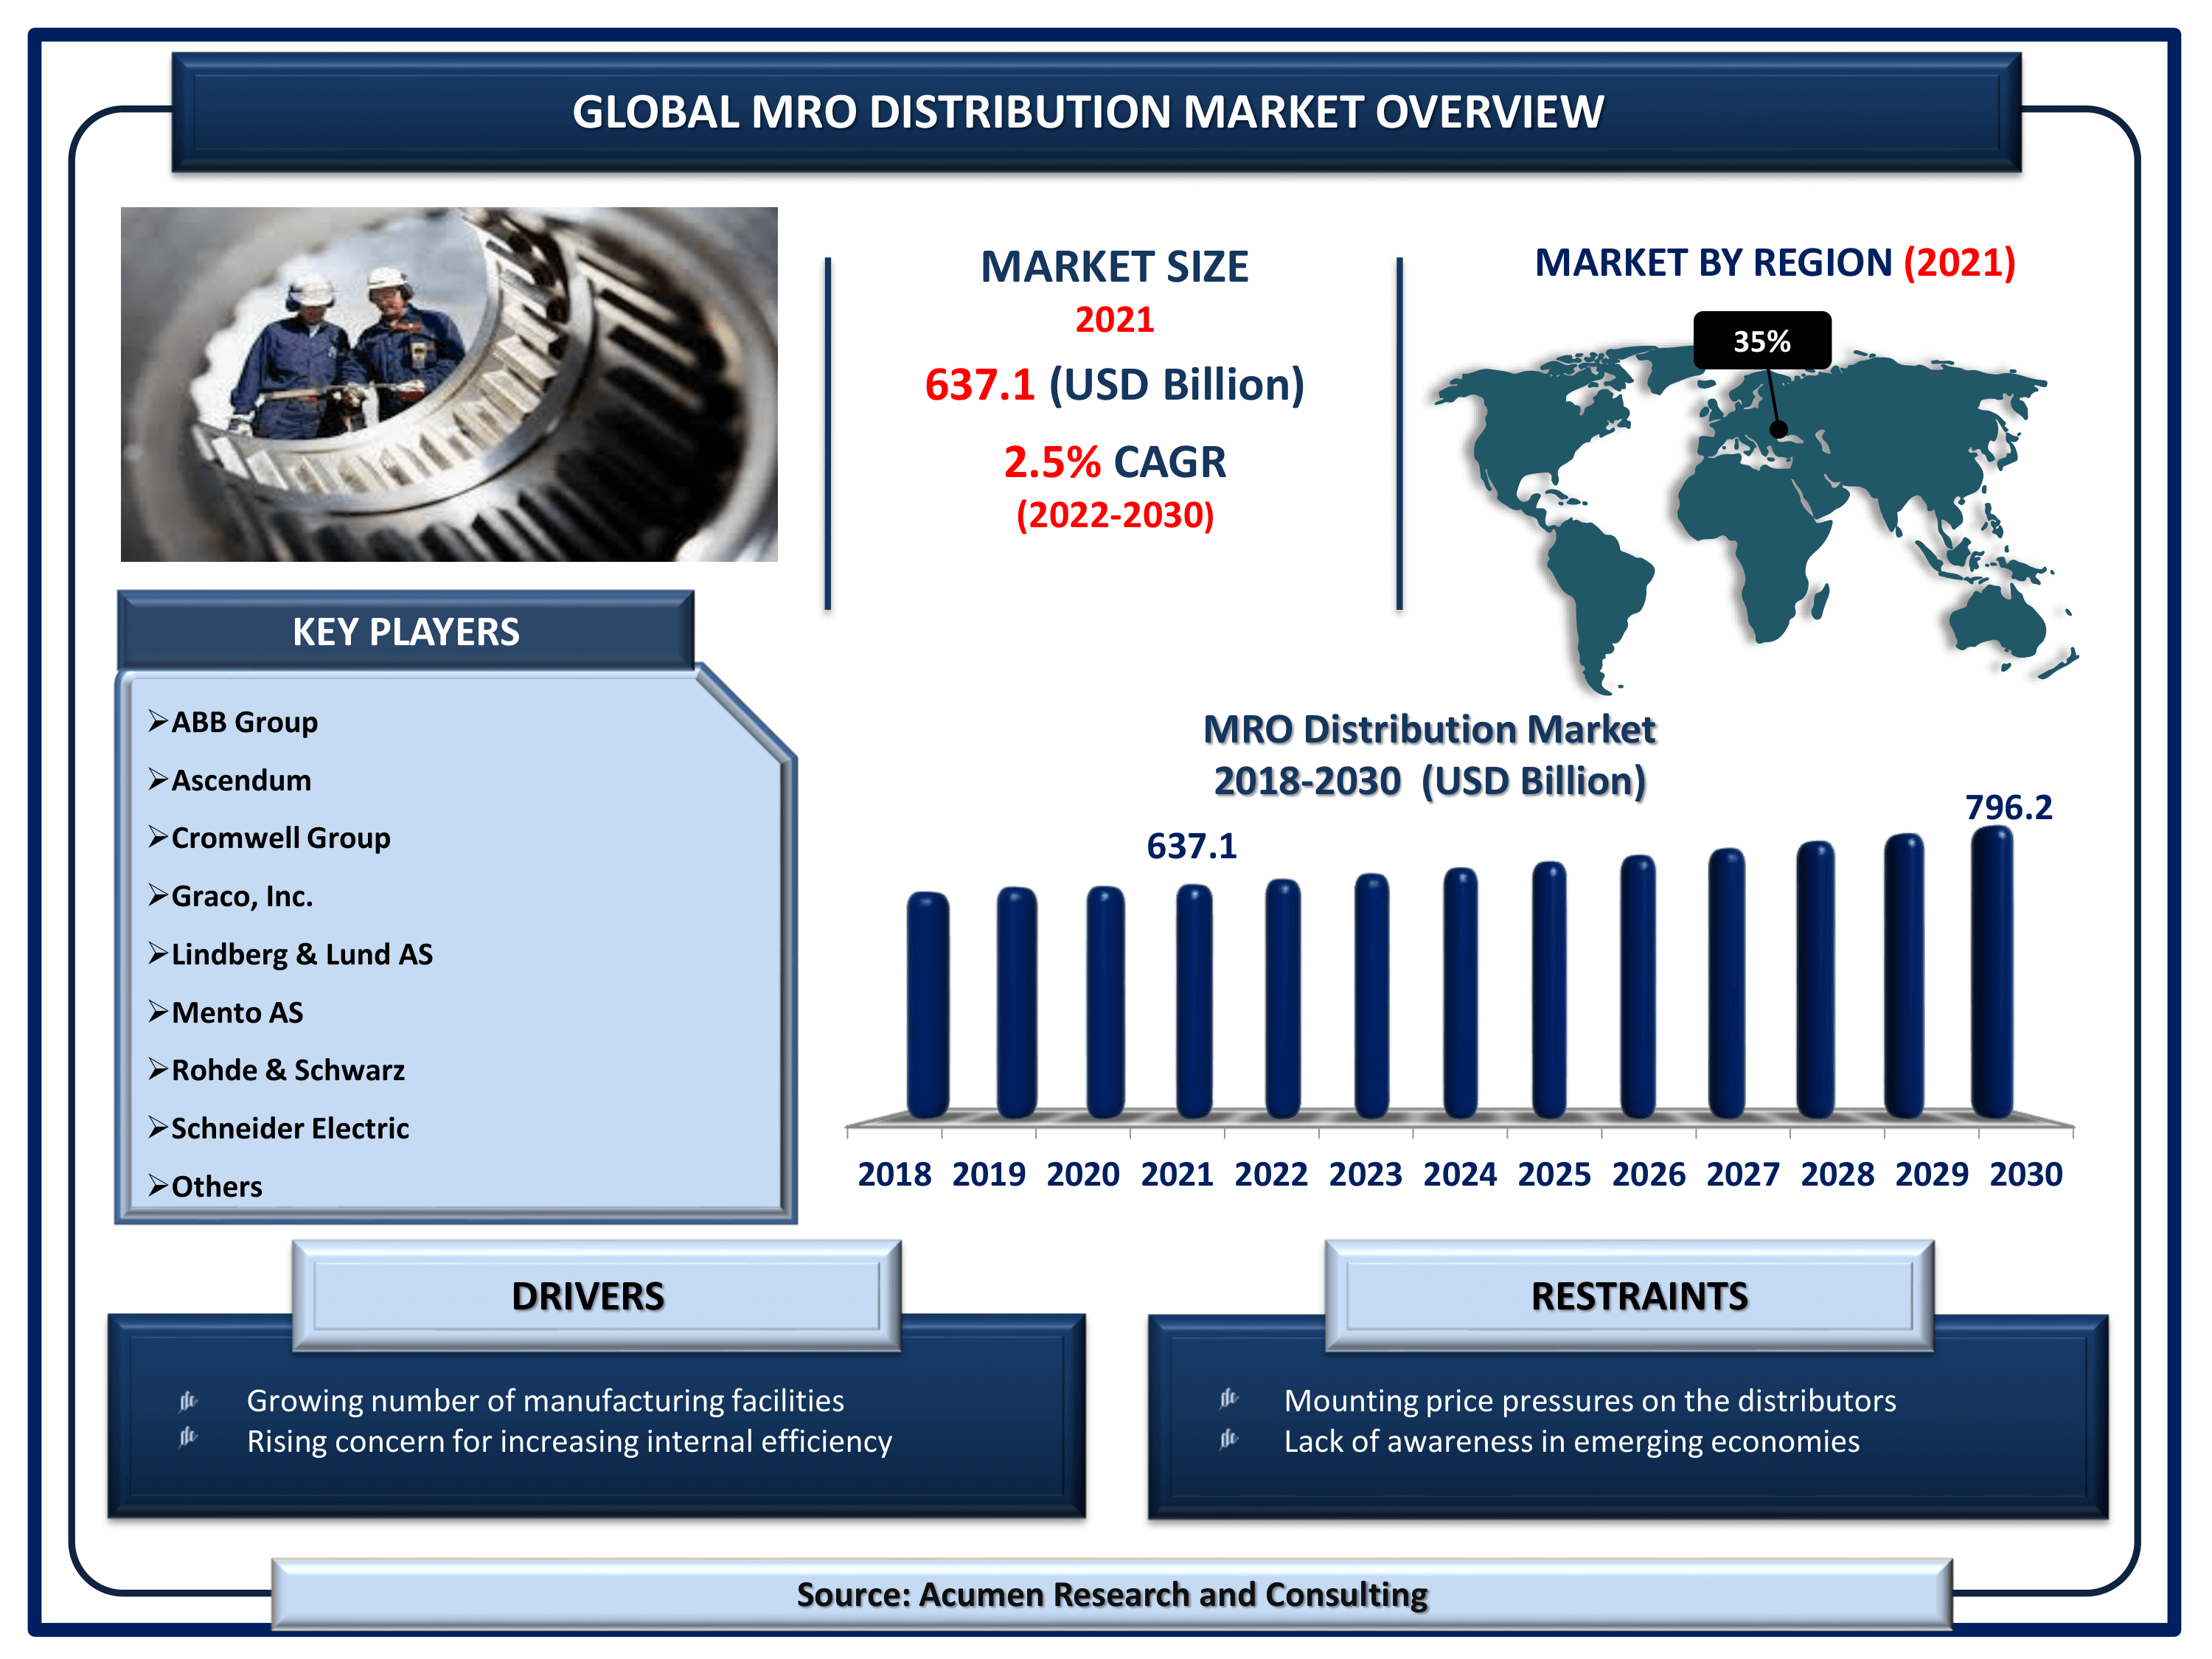 Global MRO distribution market revenue is estimated to reach USD 796.2 Billion by 2030 with a CAGR of 2.5% from 2022 to 2030